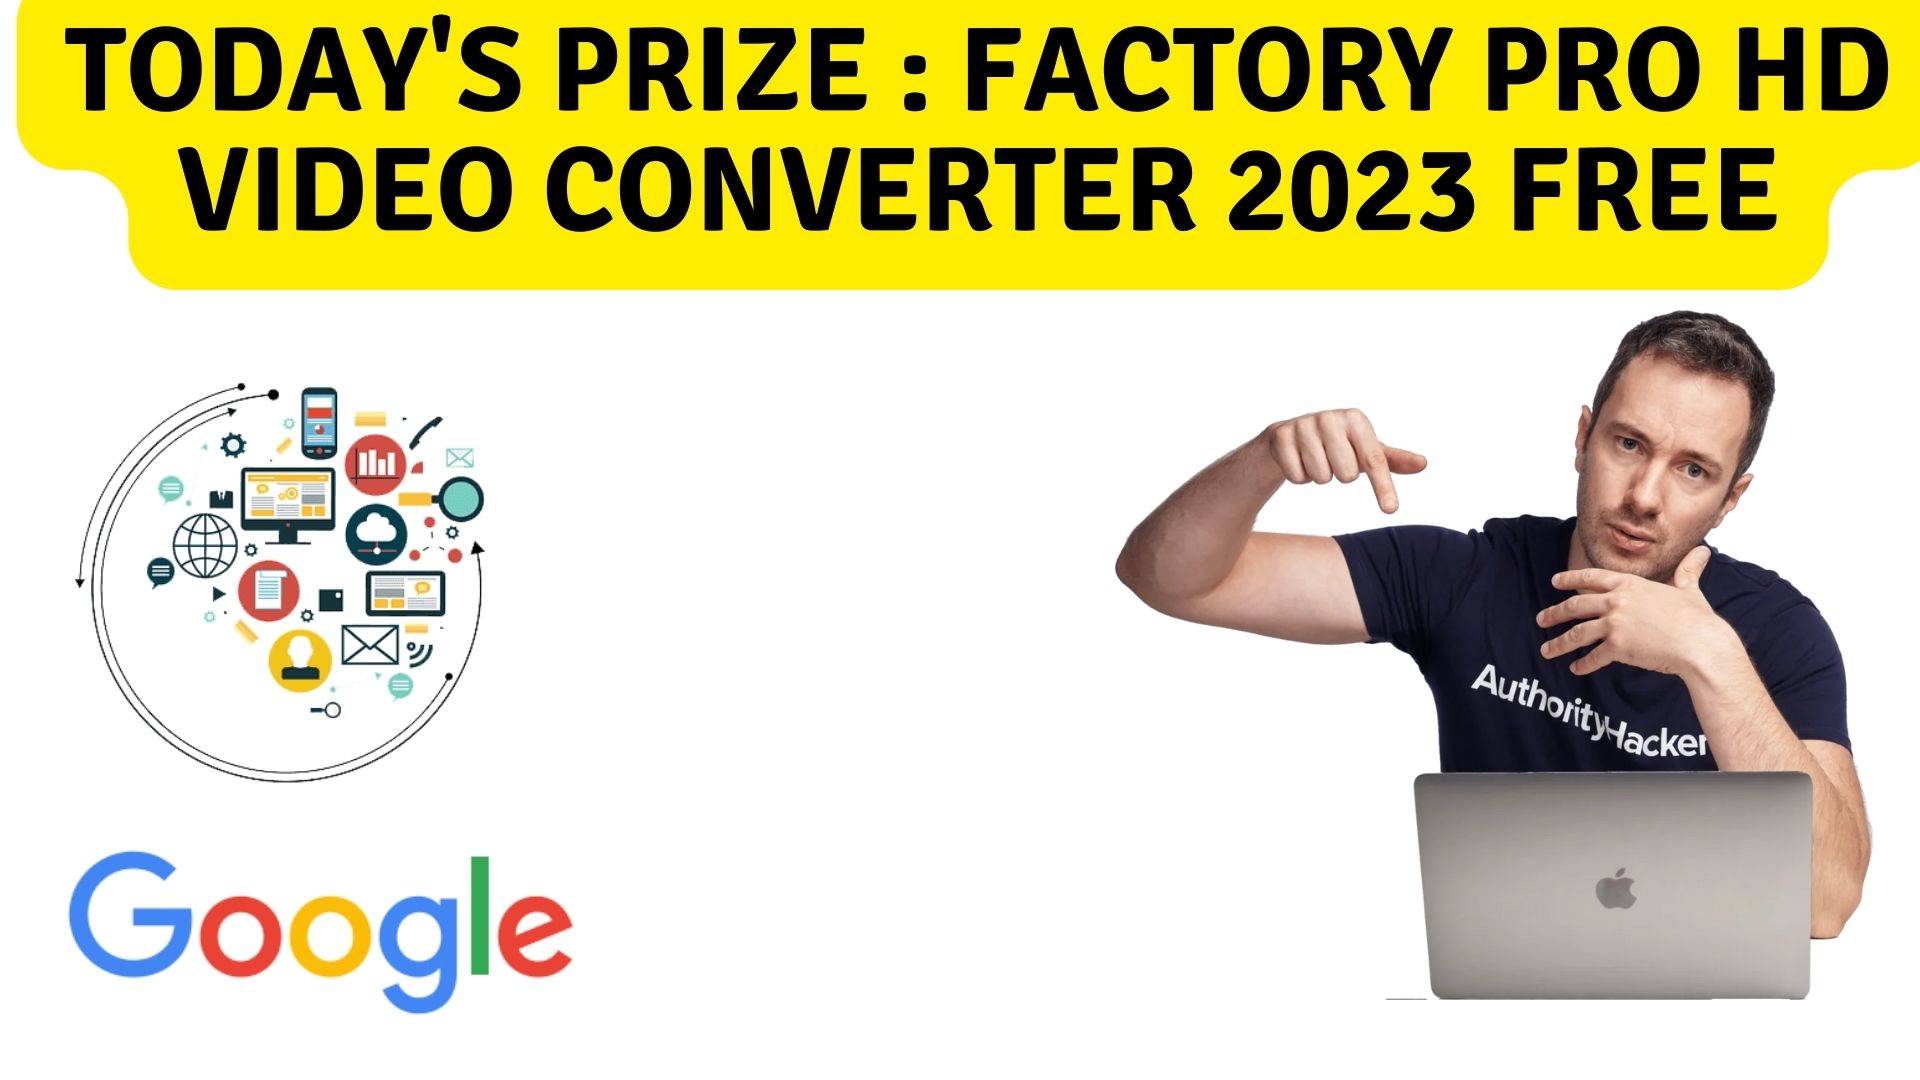 Today's prize : factory pro hd video converter 2023 free